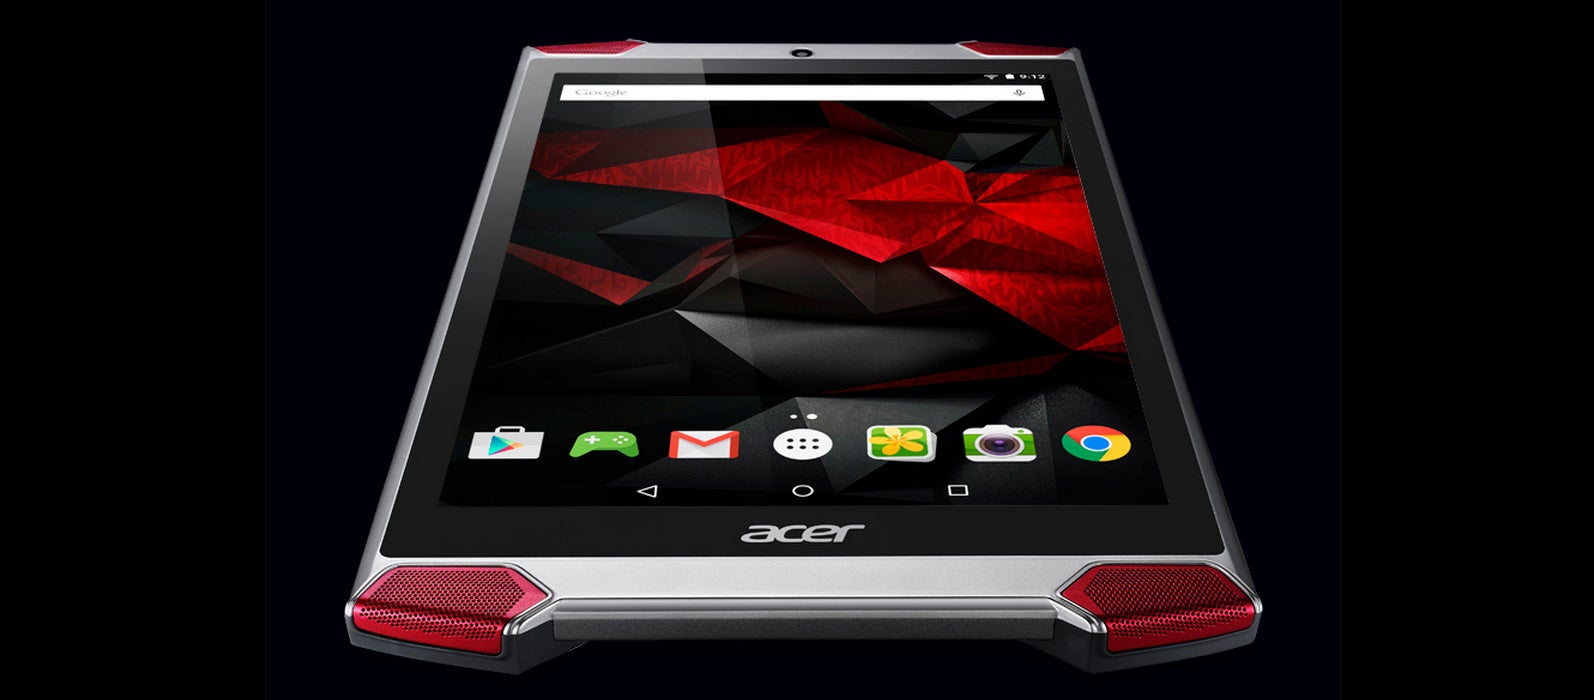 Acer Predator 8 GT-810 tablet enters the scene: made for gamers